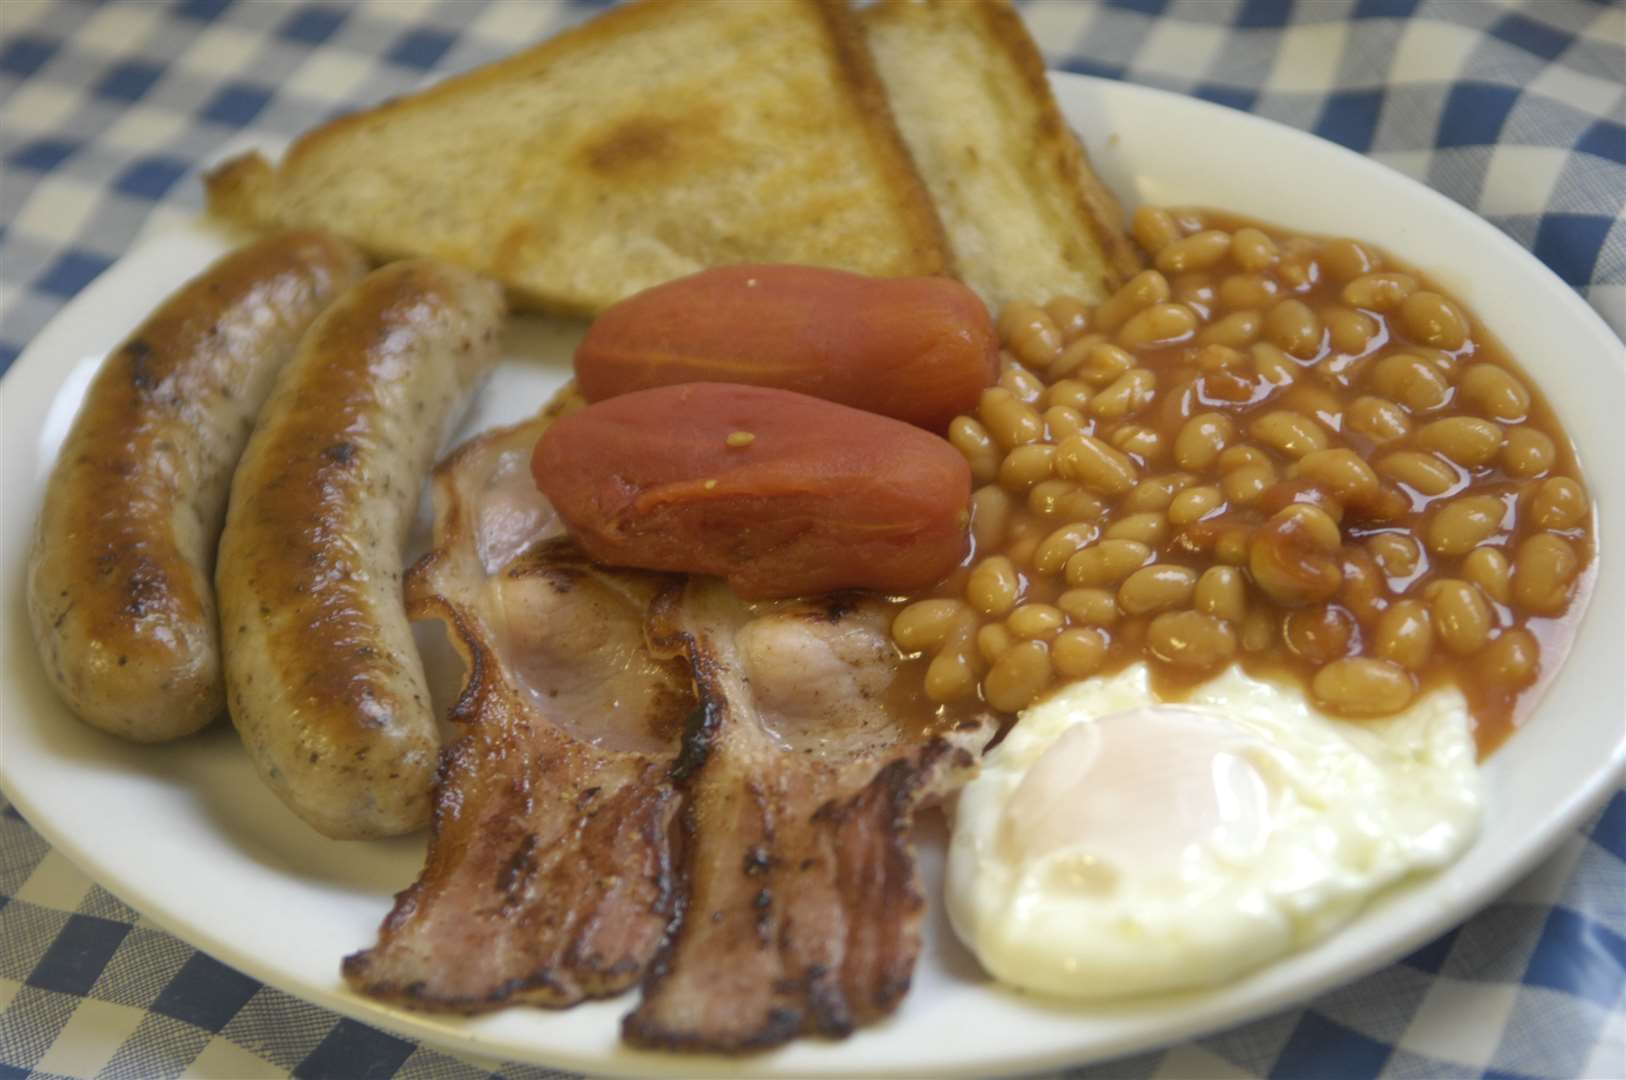 The Blue and White Cafe has been running for years, and now staff are set to expand their menu